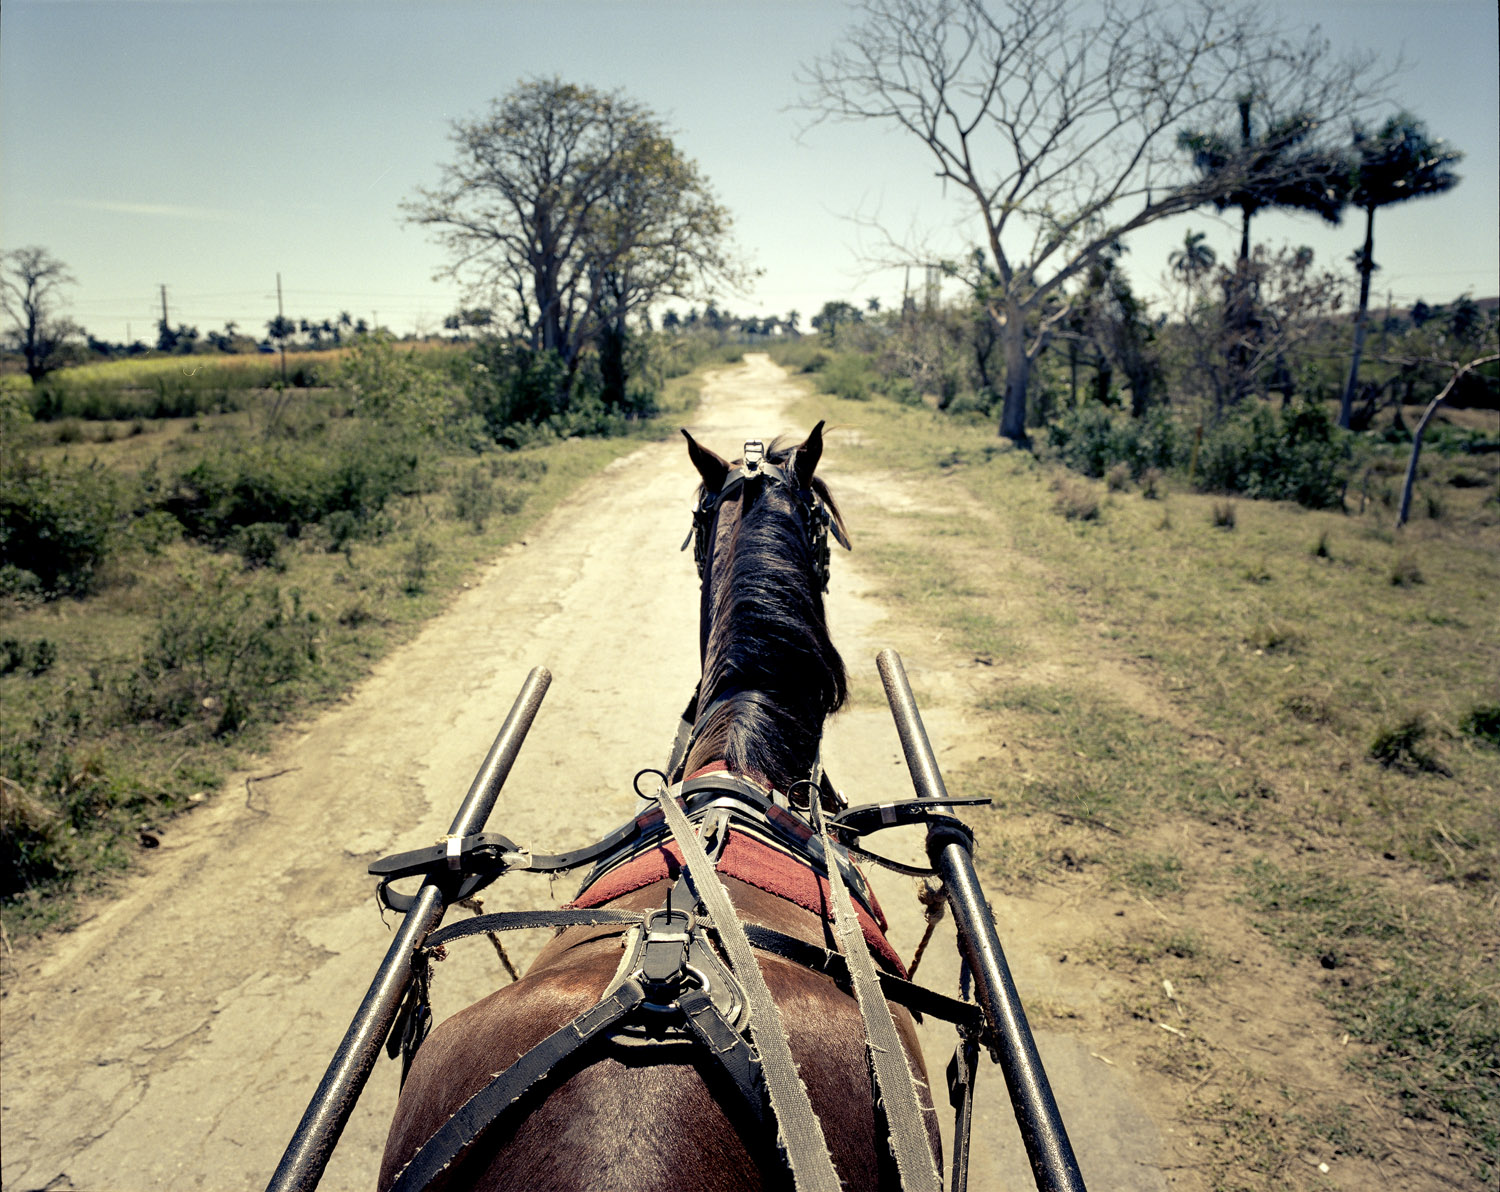 Riding on horse drawn carriages is still the main way to move in the Cuban countryside.